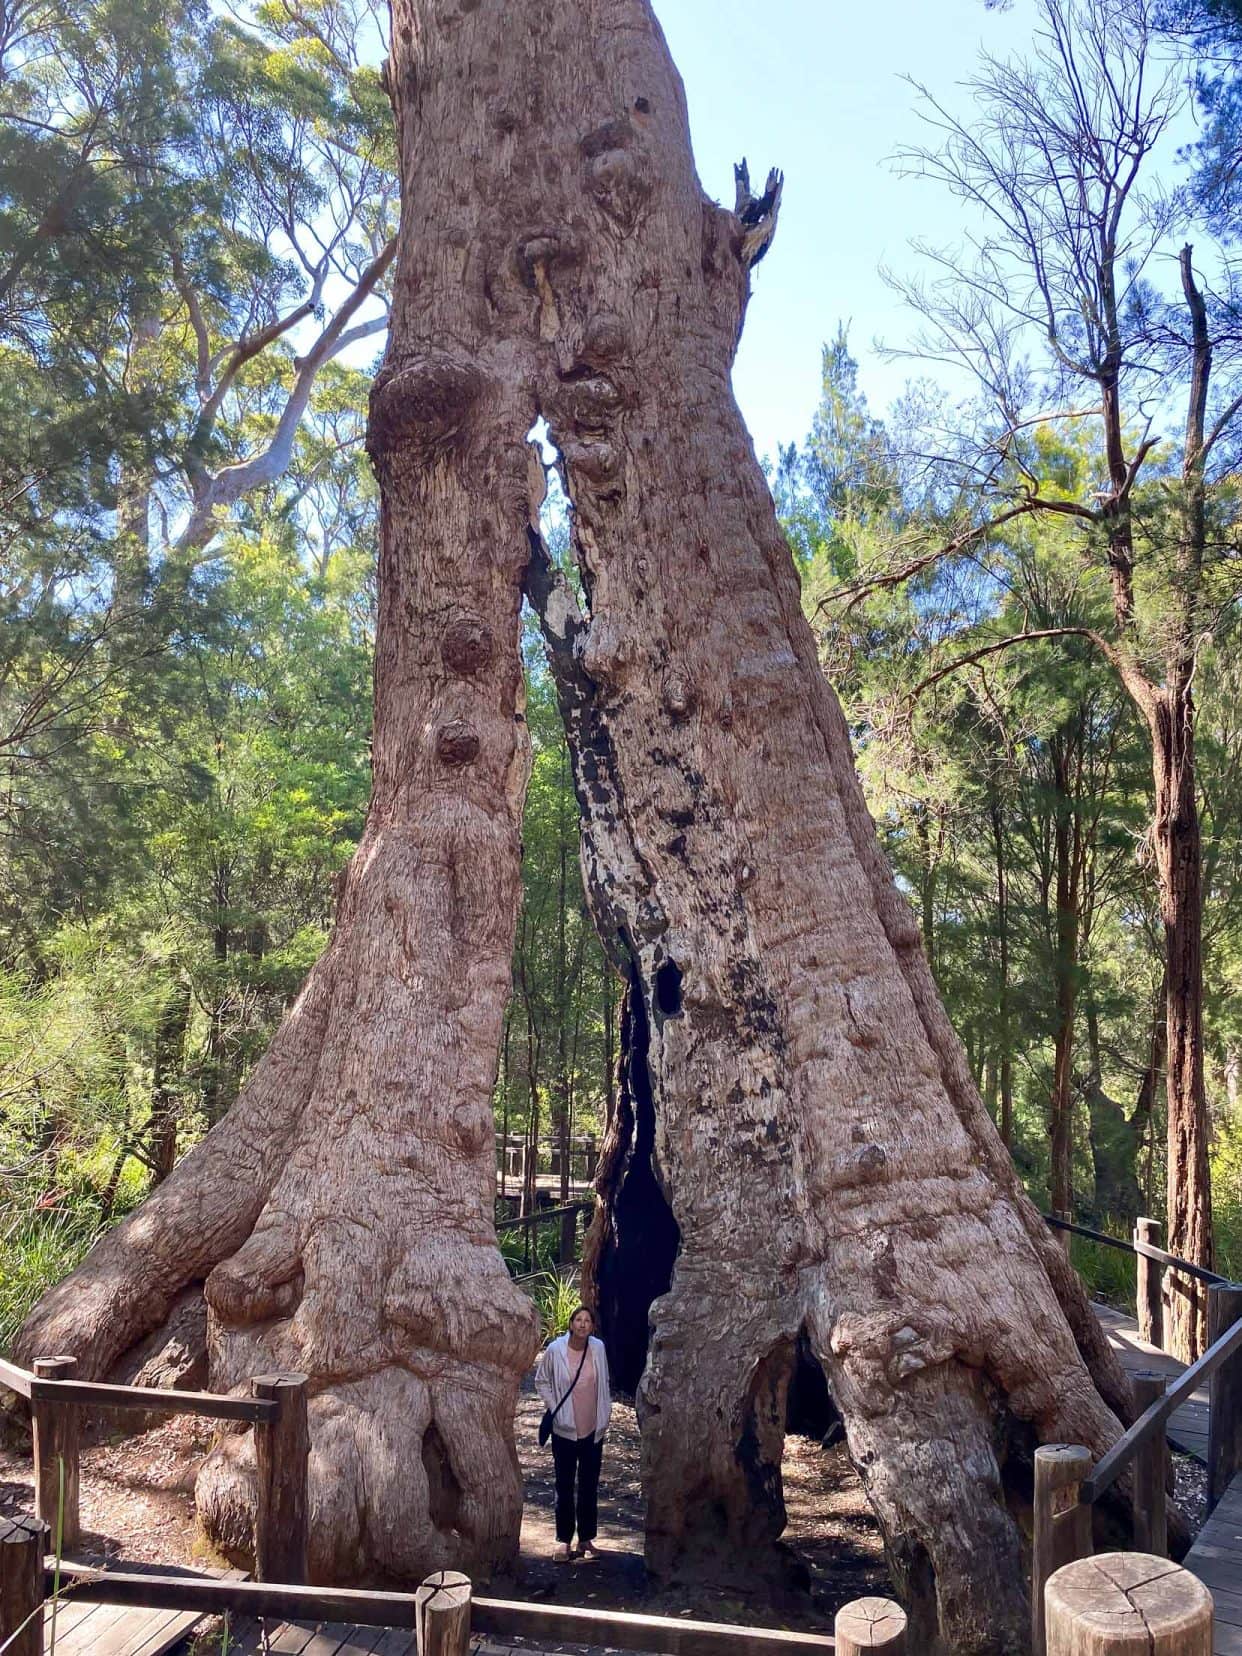 The bottom section of the giant tingle tree with a hollowed out trunk and Shelley stood at the bottom for perspective